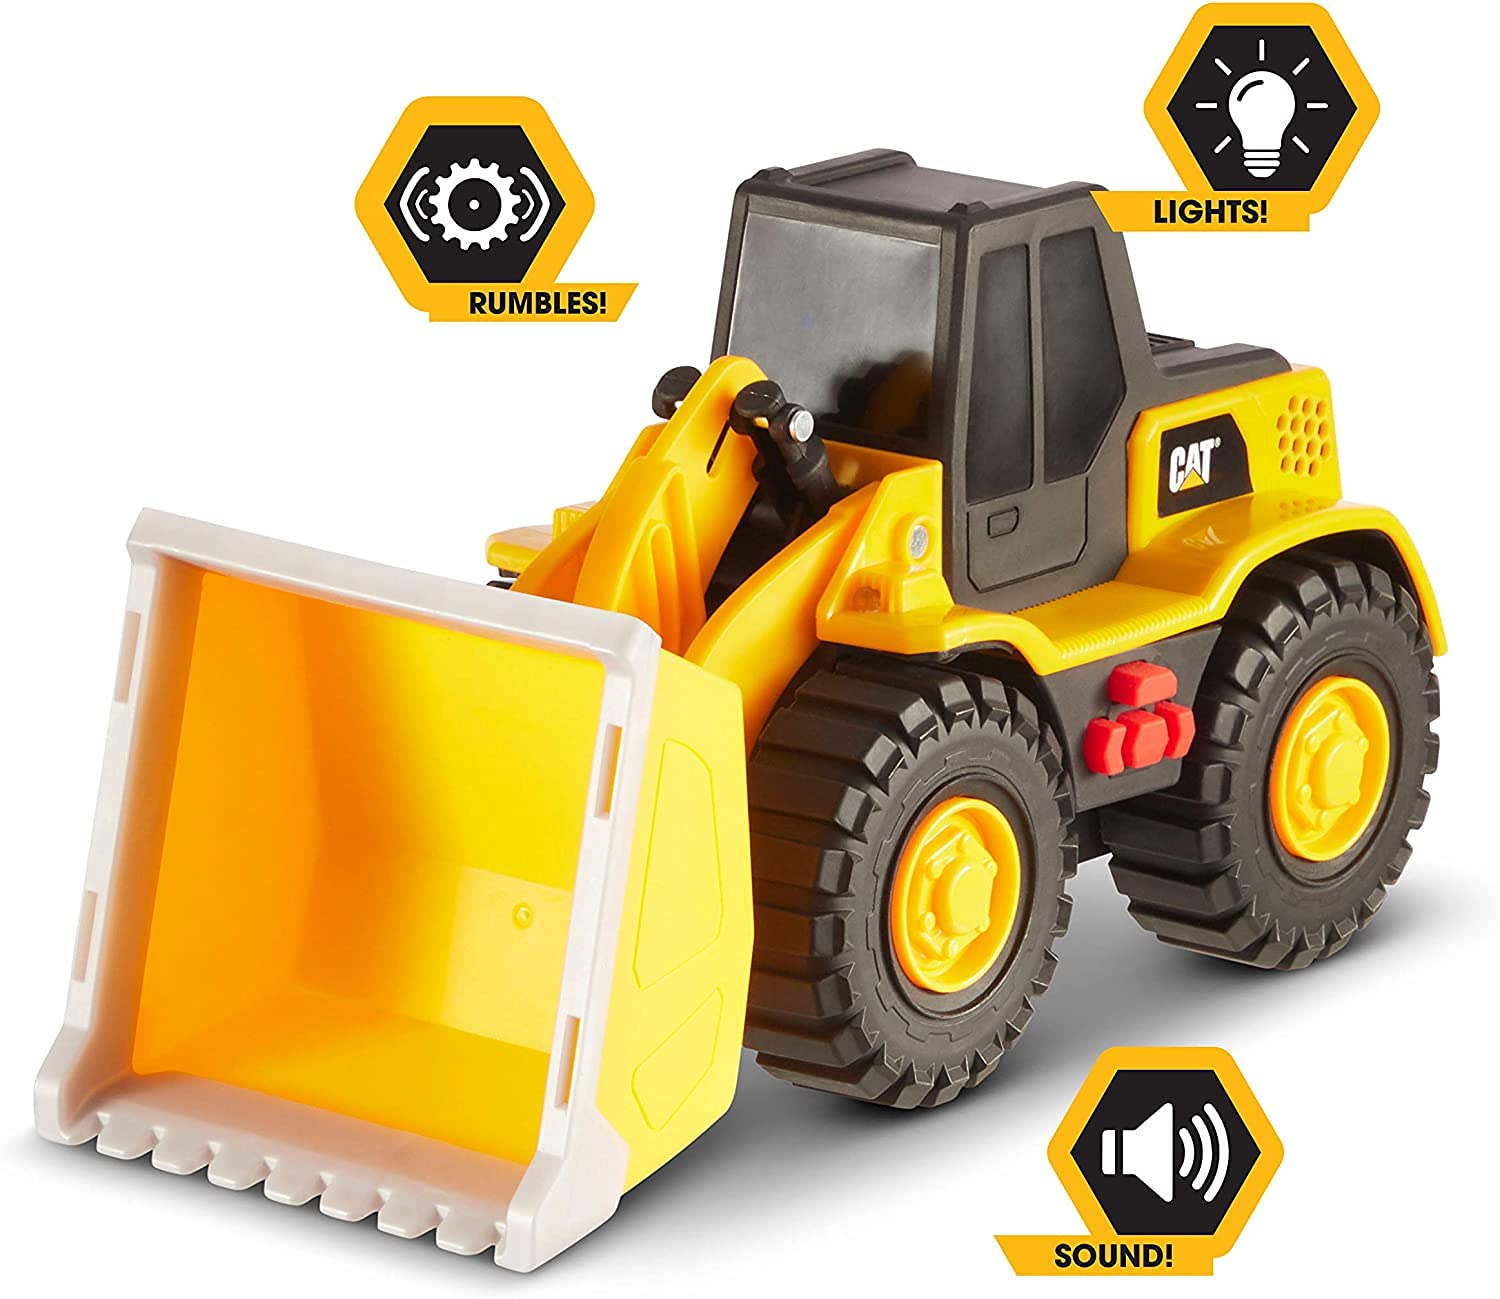 Cat Construction Tough Machines Toy Wheel Loader with Lights & Sounds, Yellow